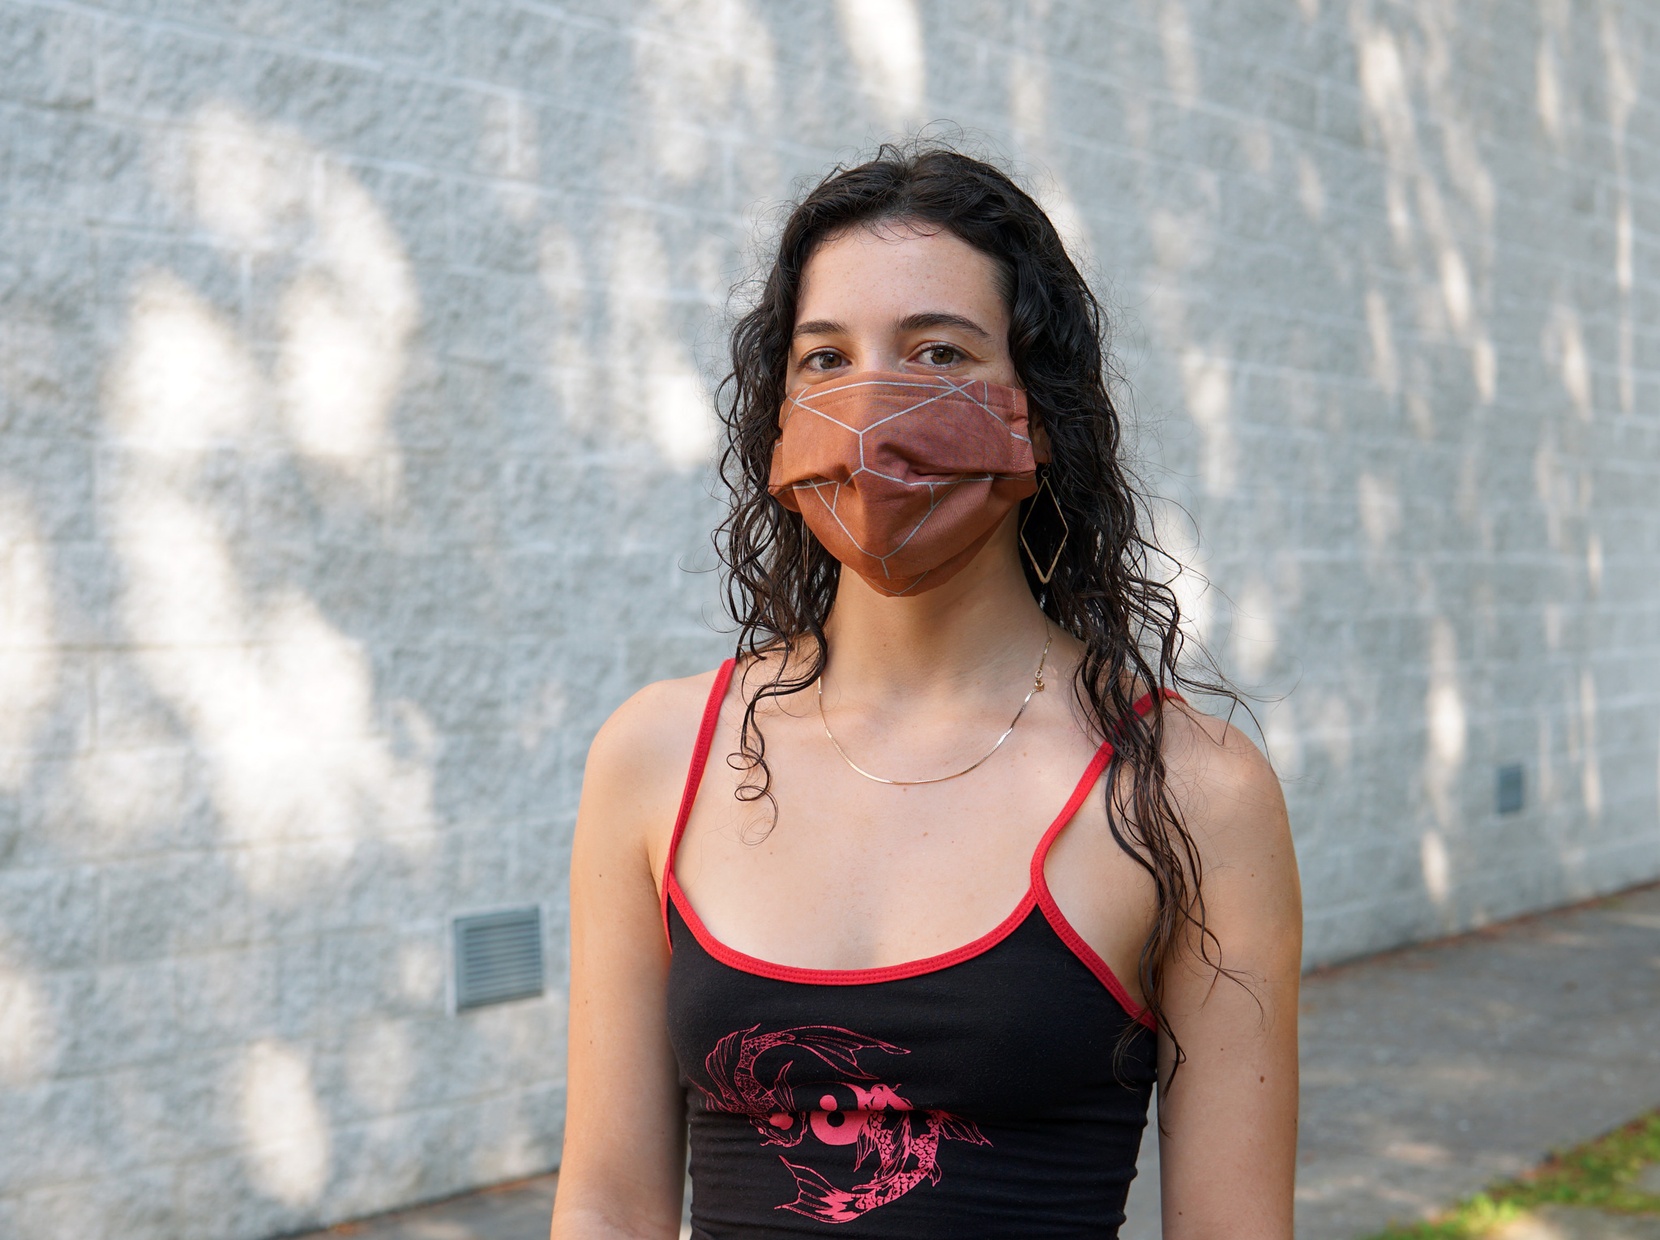 A light-skinned, young woman with dark hair wearing a reddish-orange mask with gray, geometric patterns printed on it.